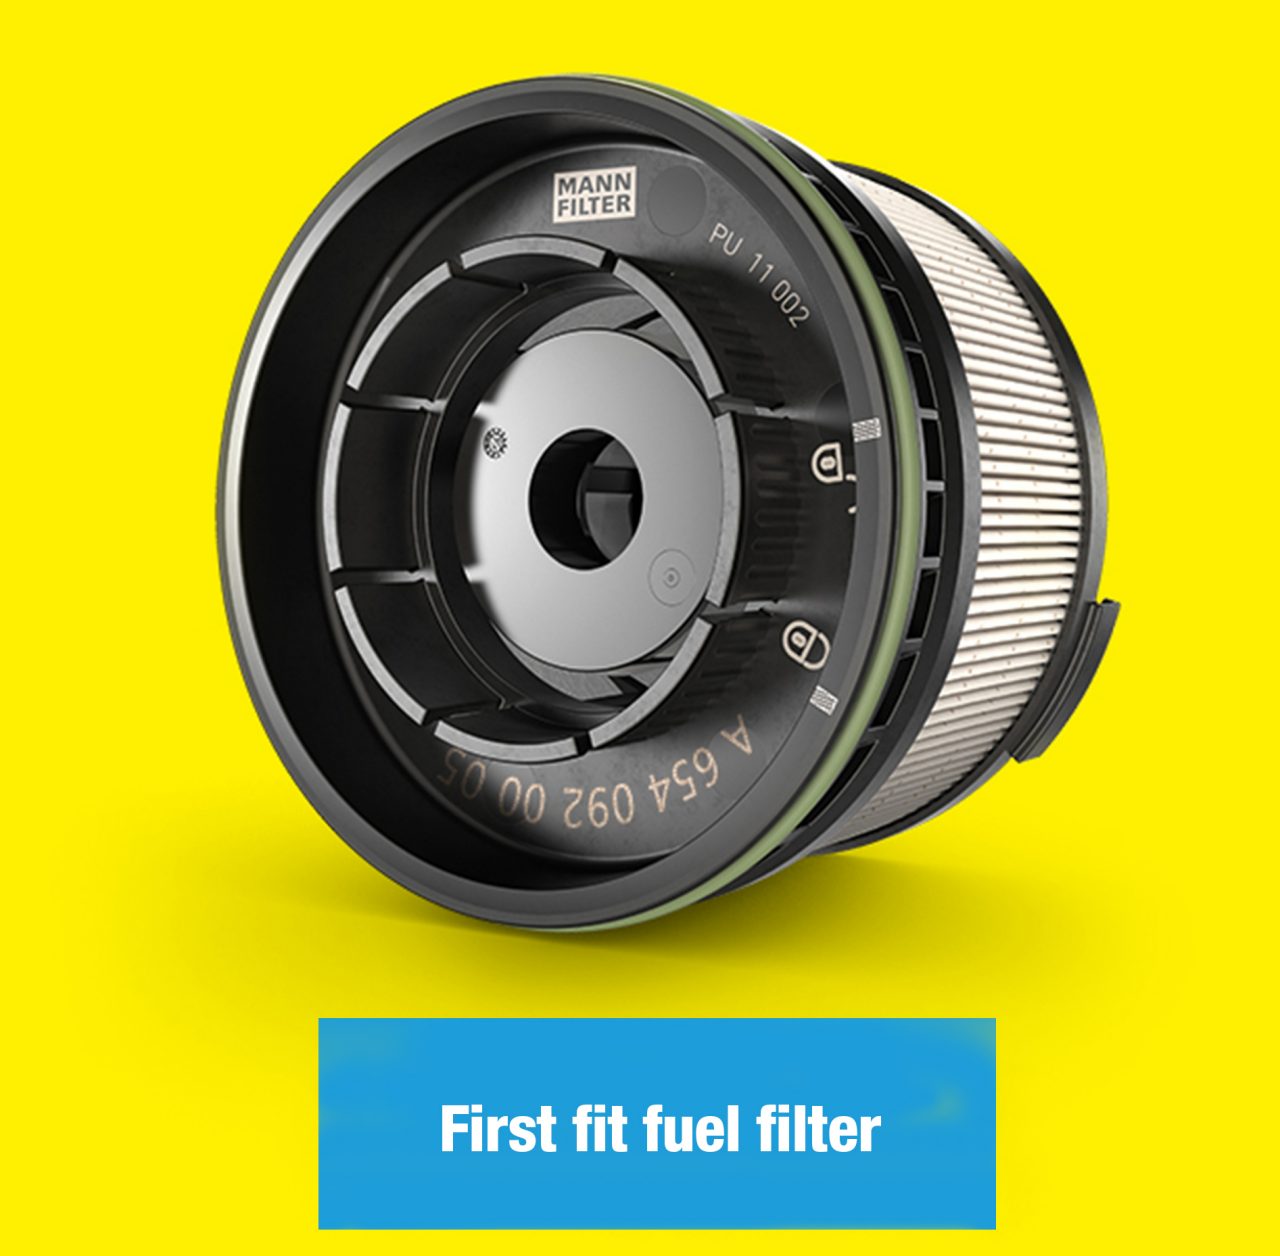 Easy installation with first fit fuel filter PU11002z